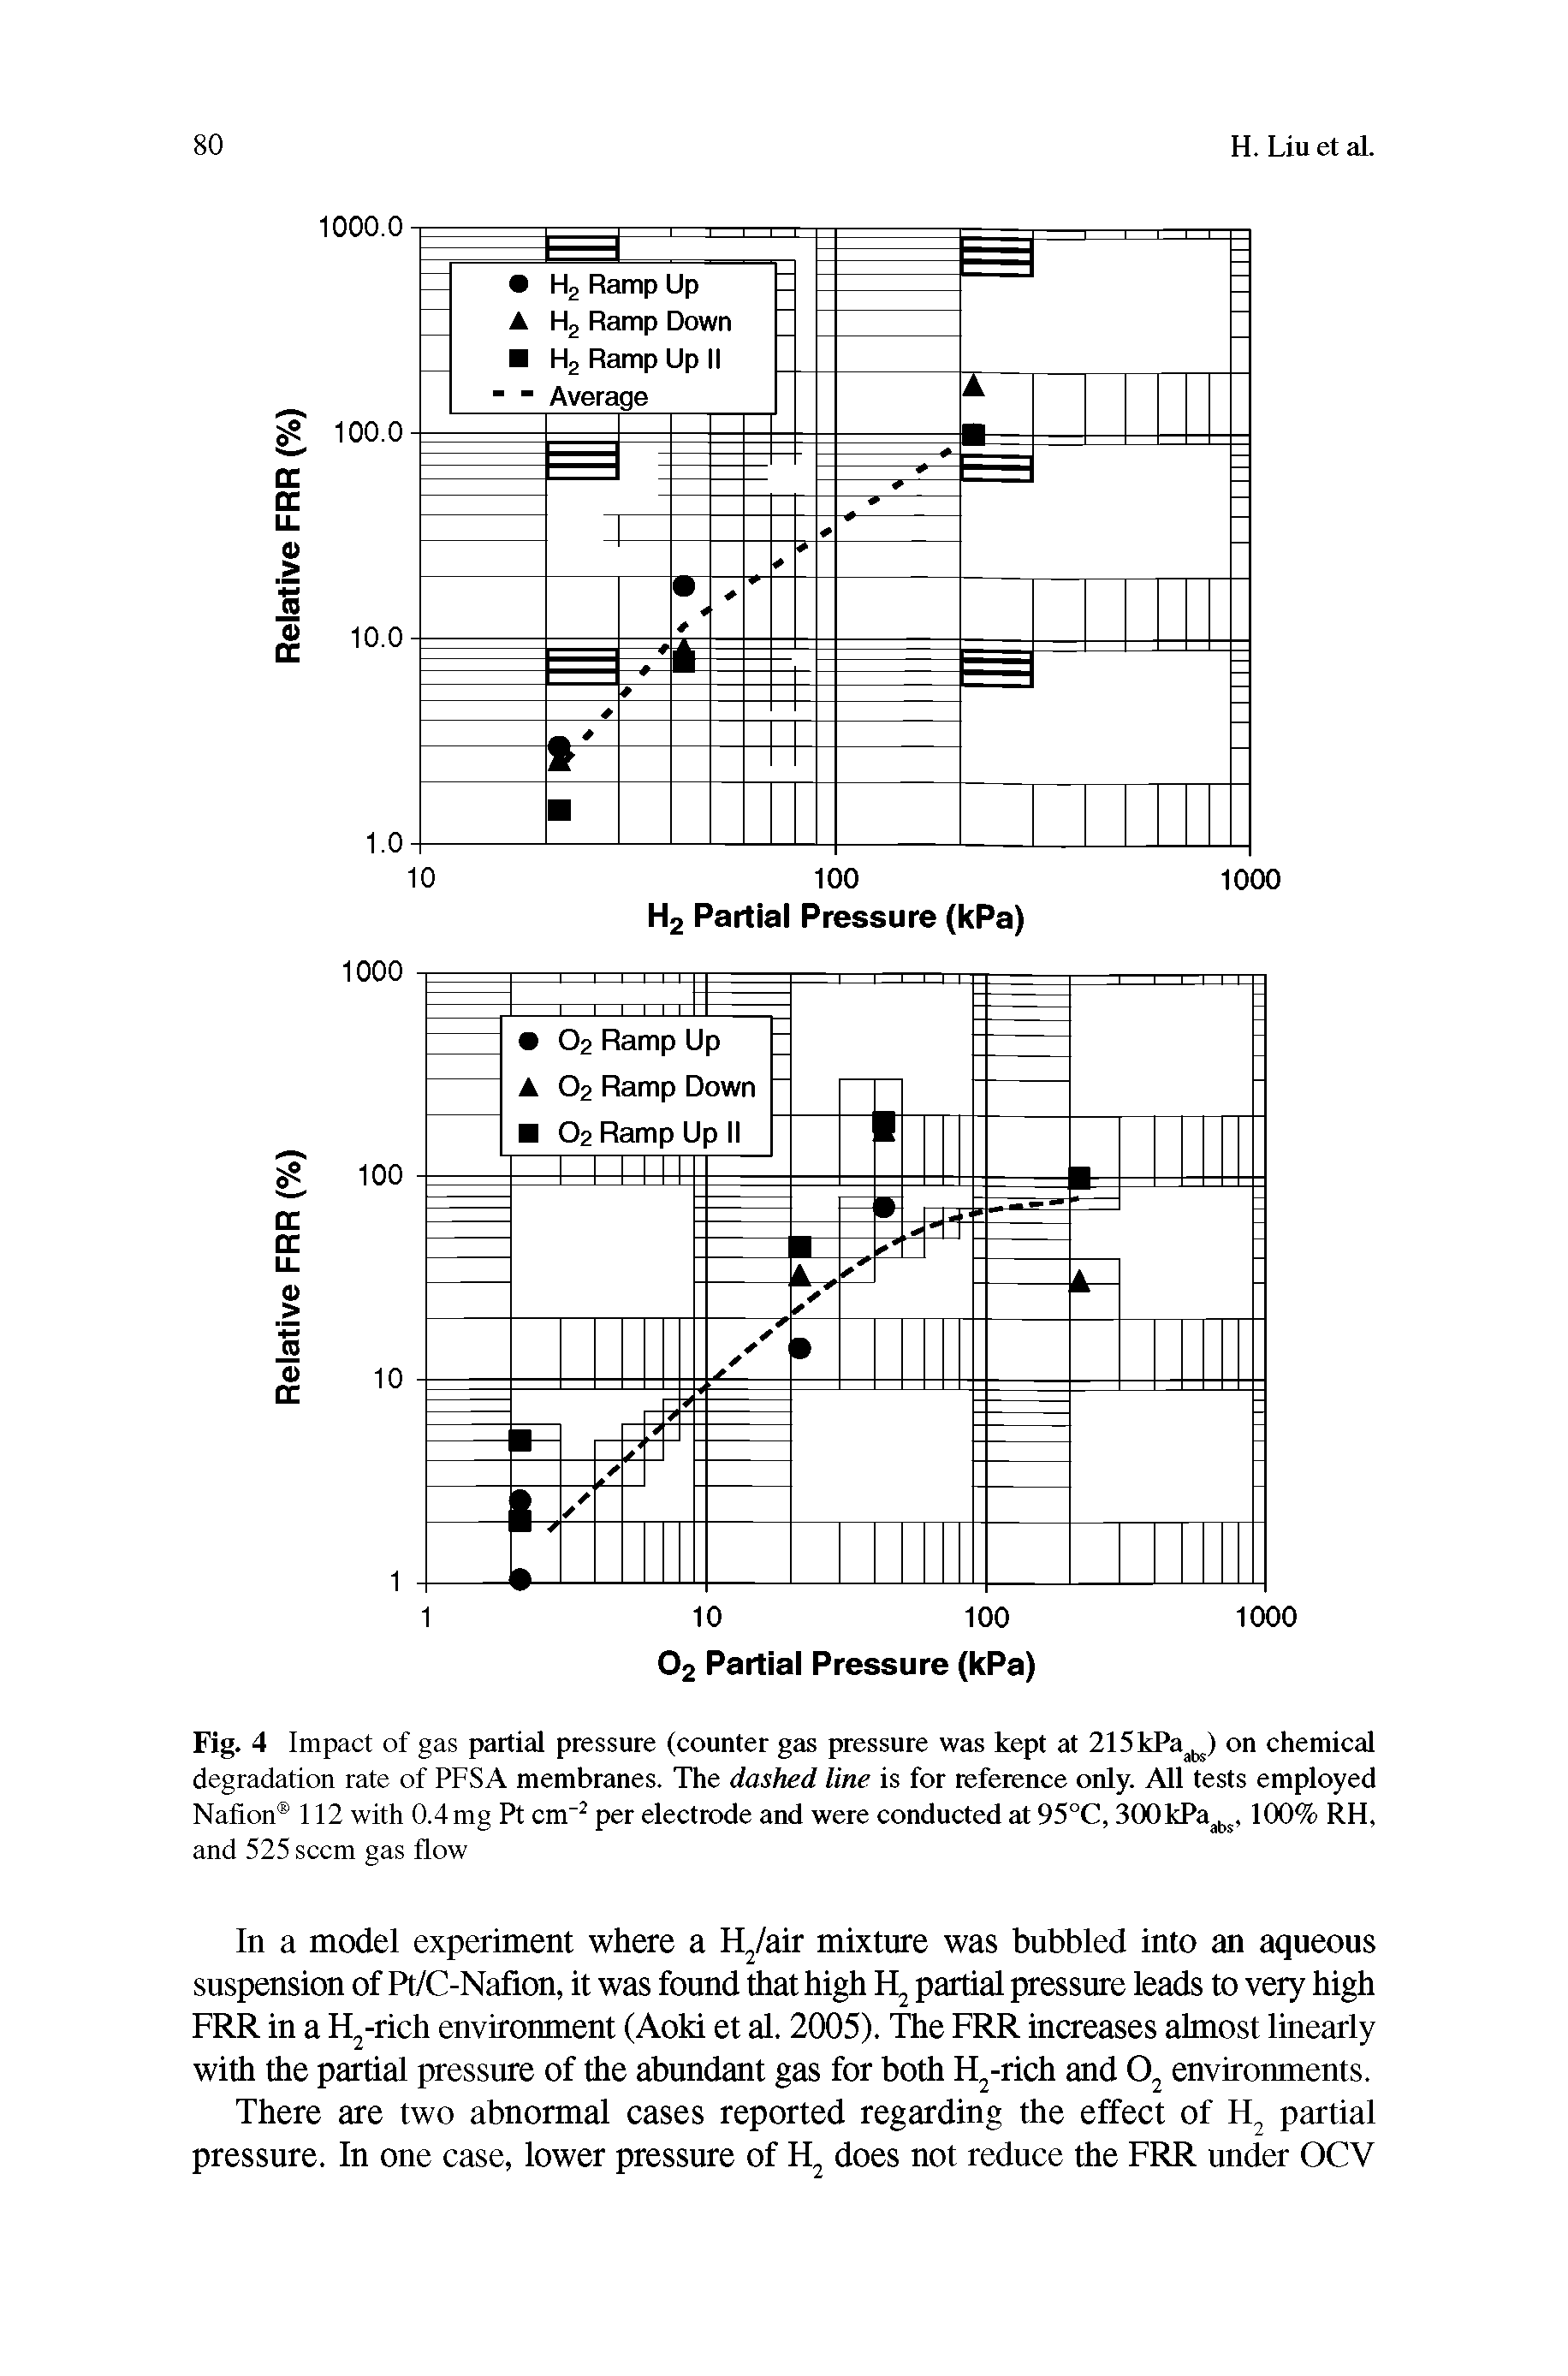 Fig. 4 Impact of gas partial pressure (counter gas pressure was kept at 215kPa ) on chemical degradation rate of PFSA membrtmes. The dashed line is for reference only. All tests employed Nafion 112 with 0.4 mg Pt cm" per electrode and were conducted at 95°C, 300kPa, 100% RH,...